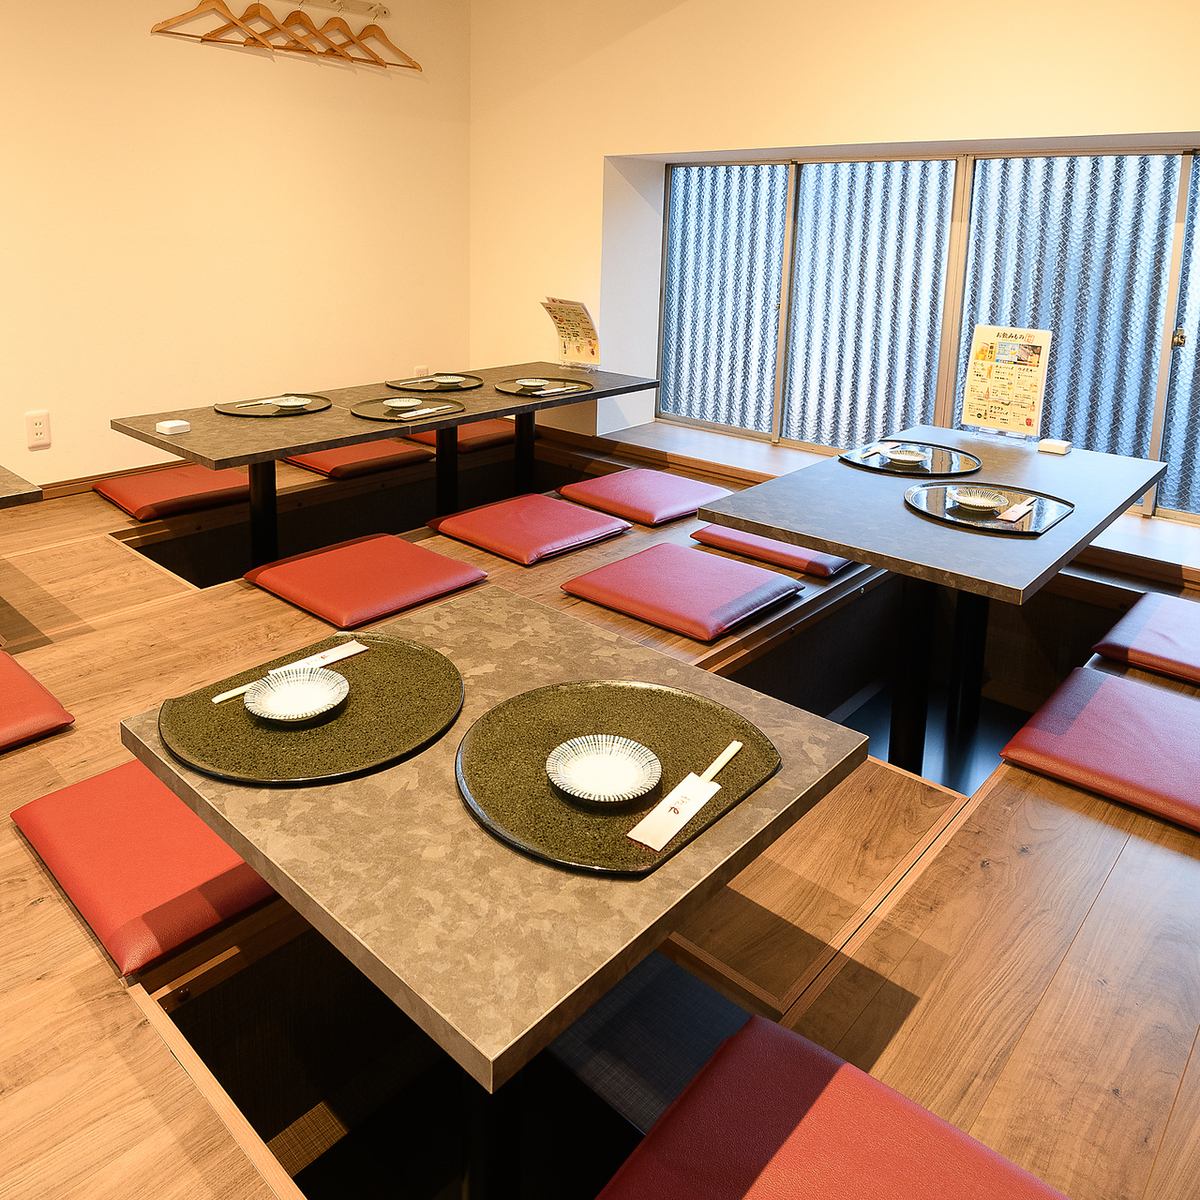 Reservations can be made for up to 20 people ♪ Relax at the sunken kotatsu.